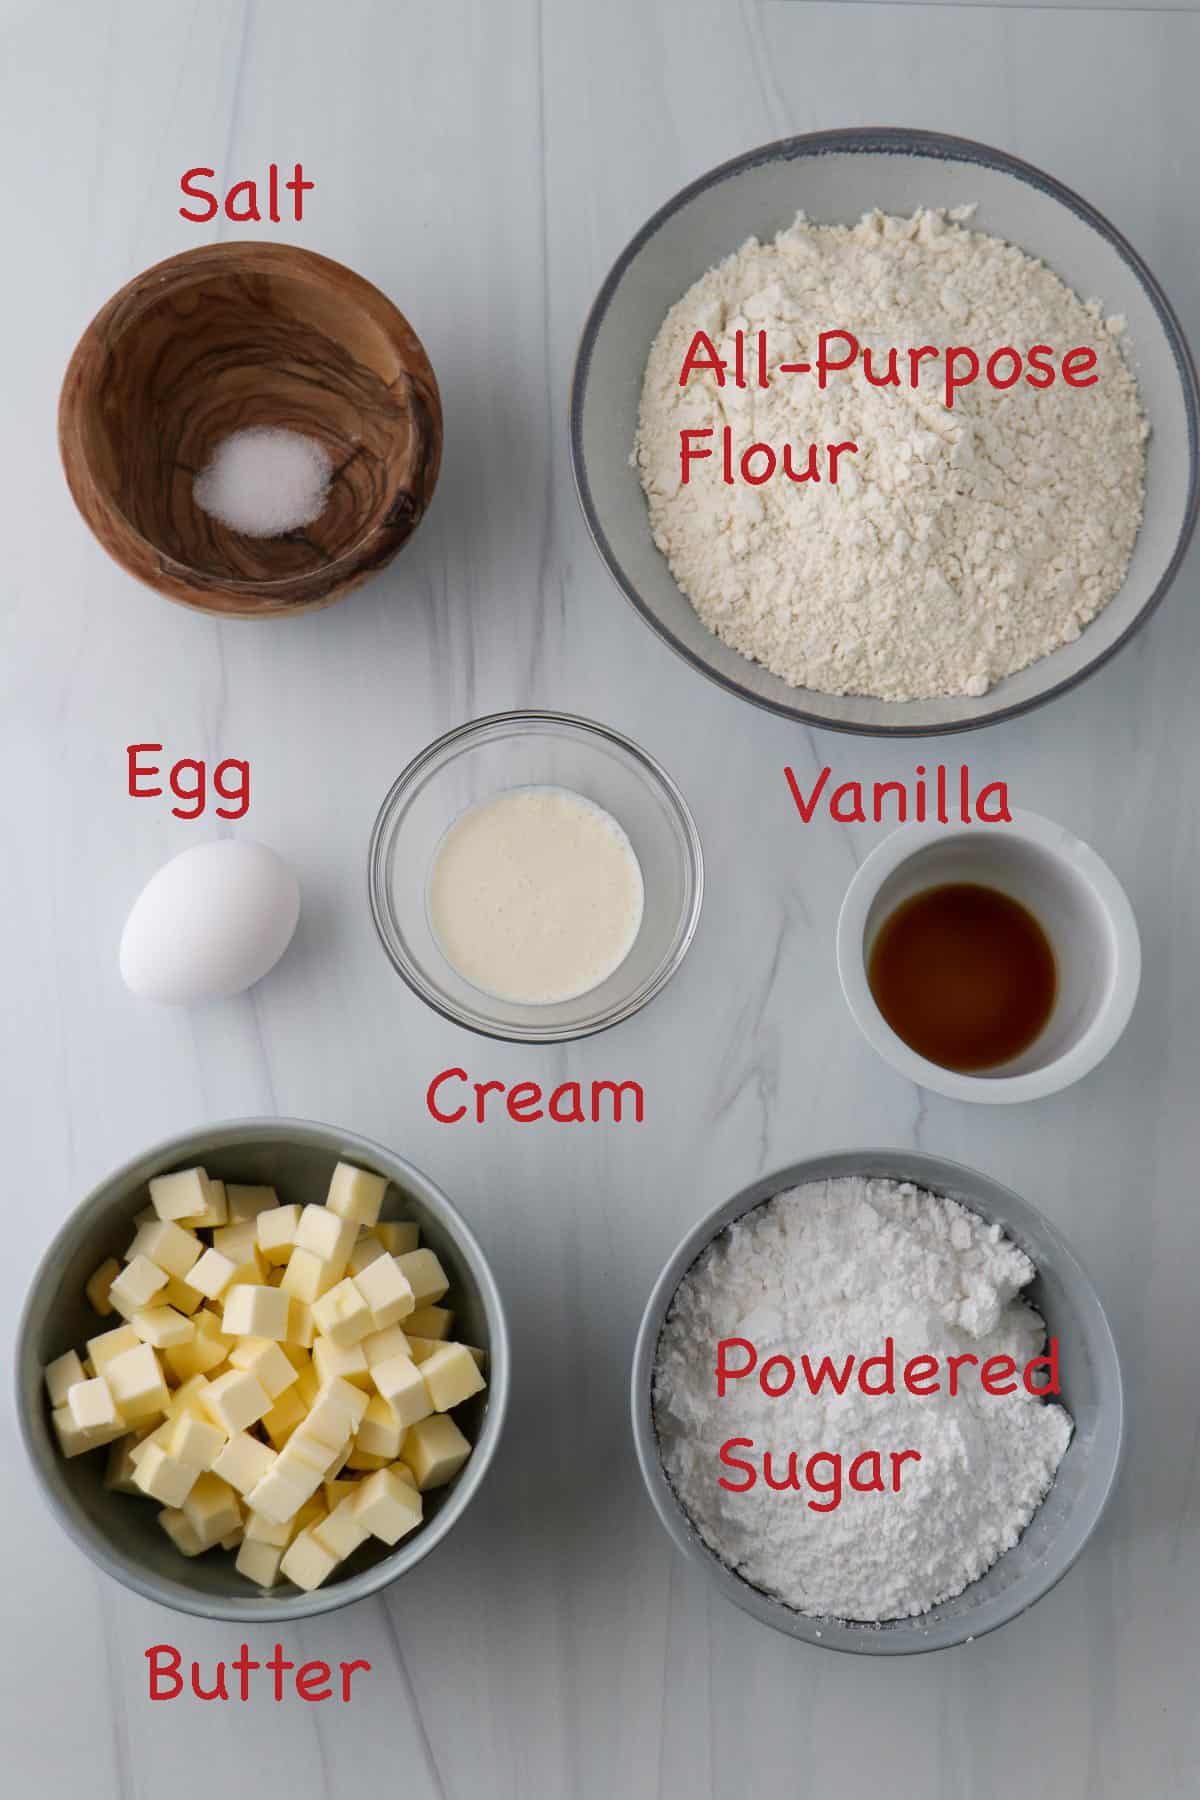 Labeled ingredients for pastry dough.